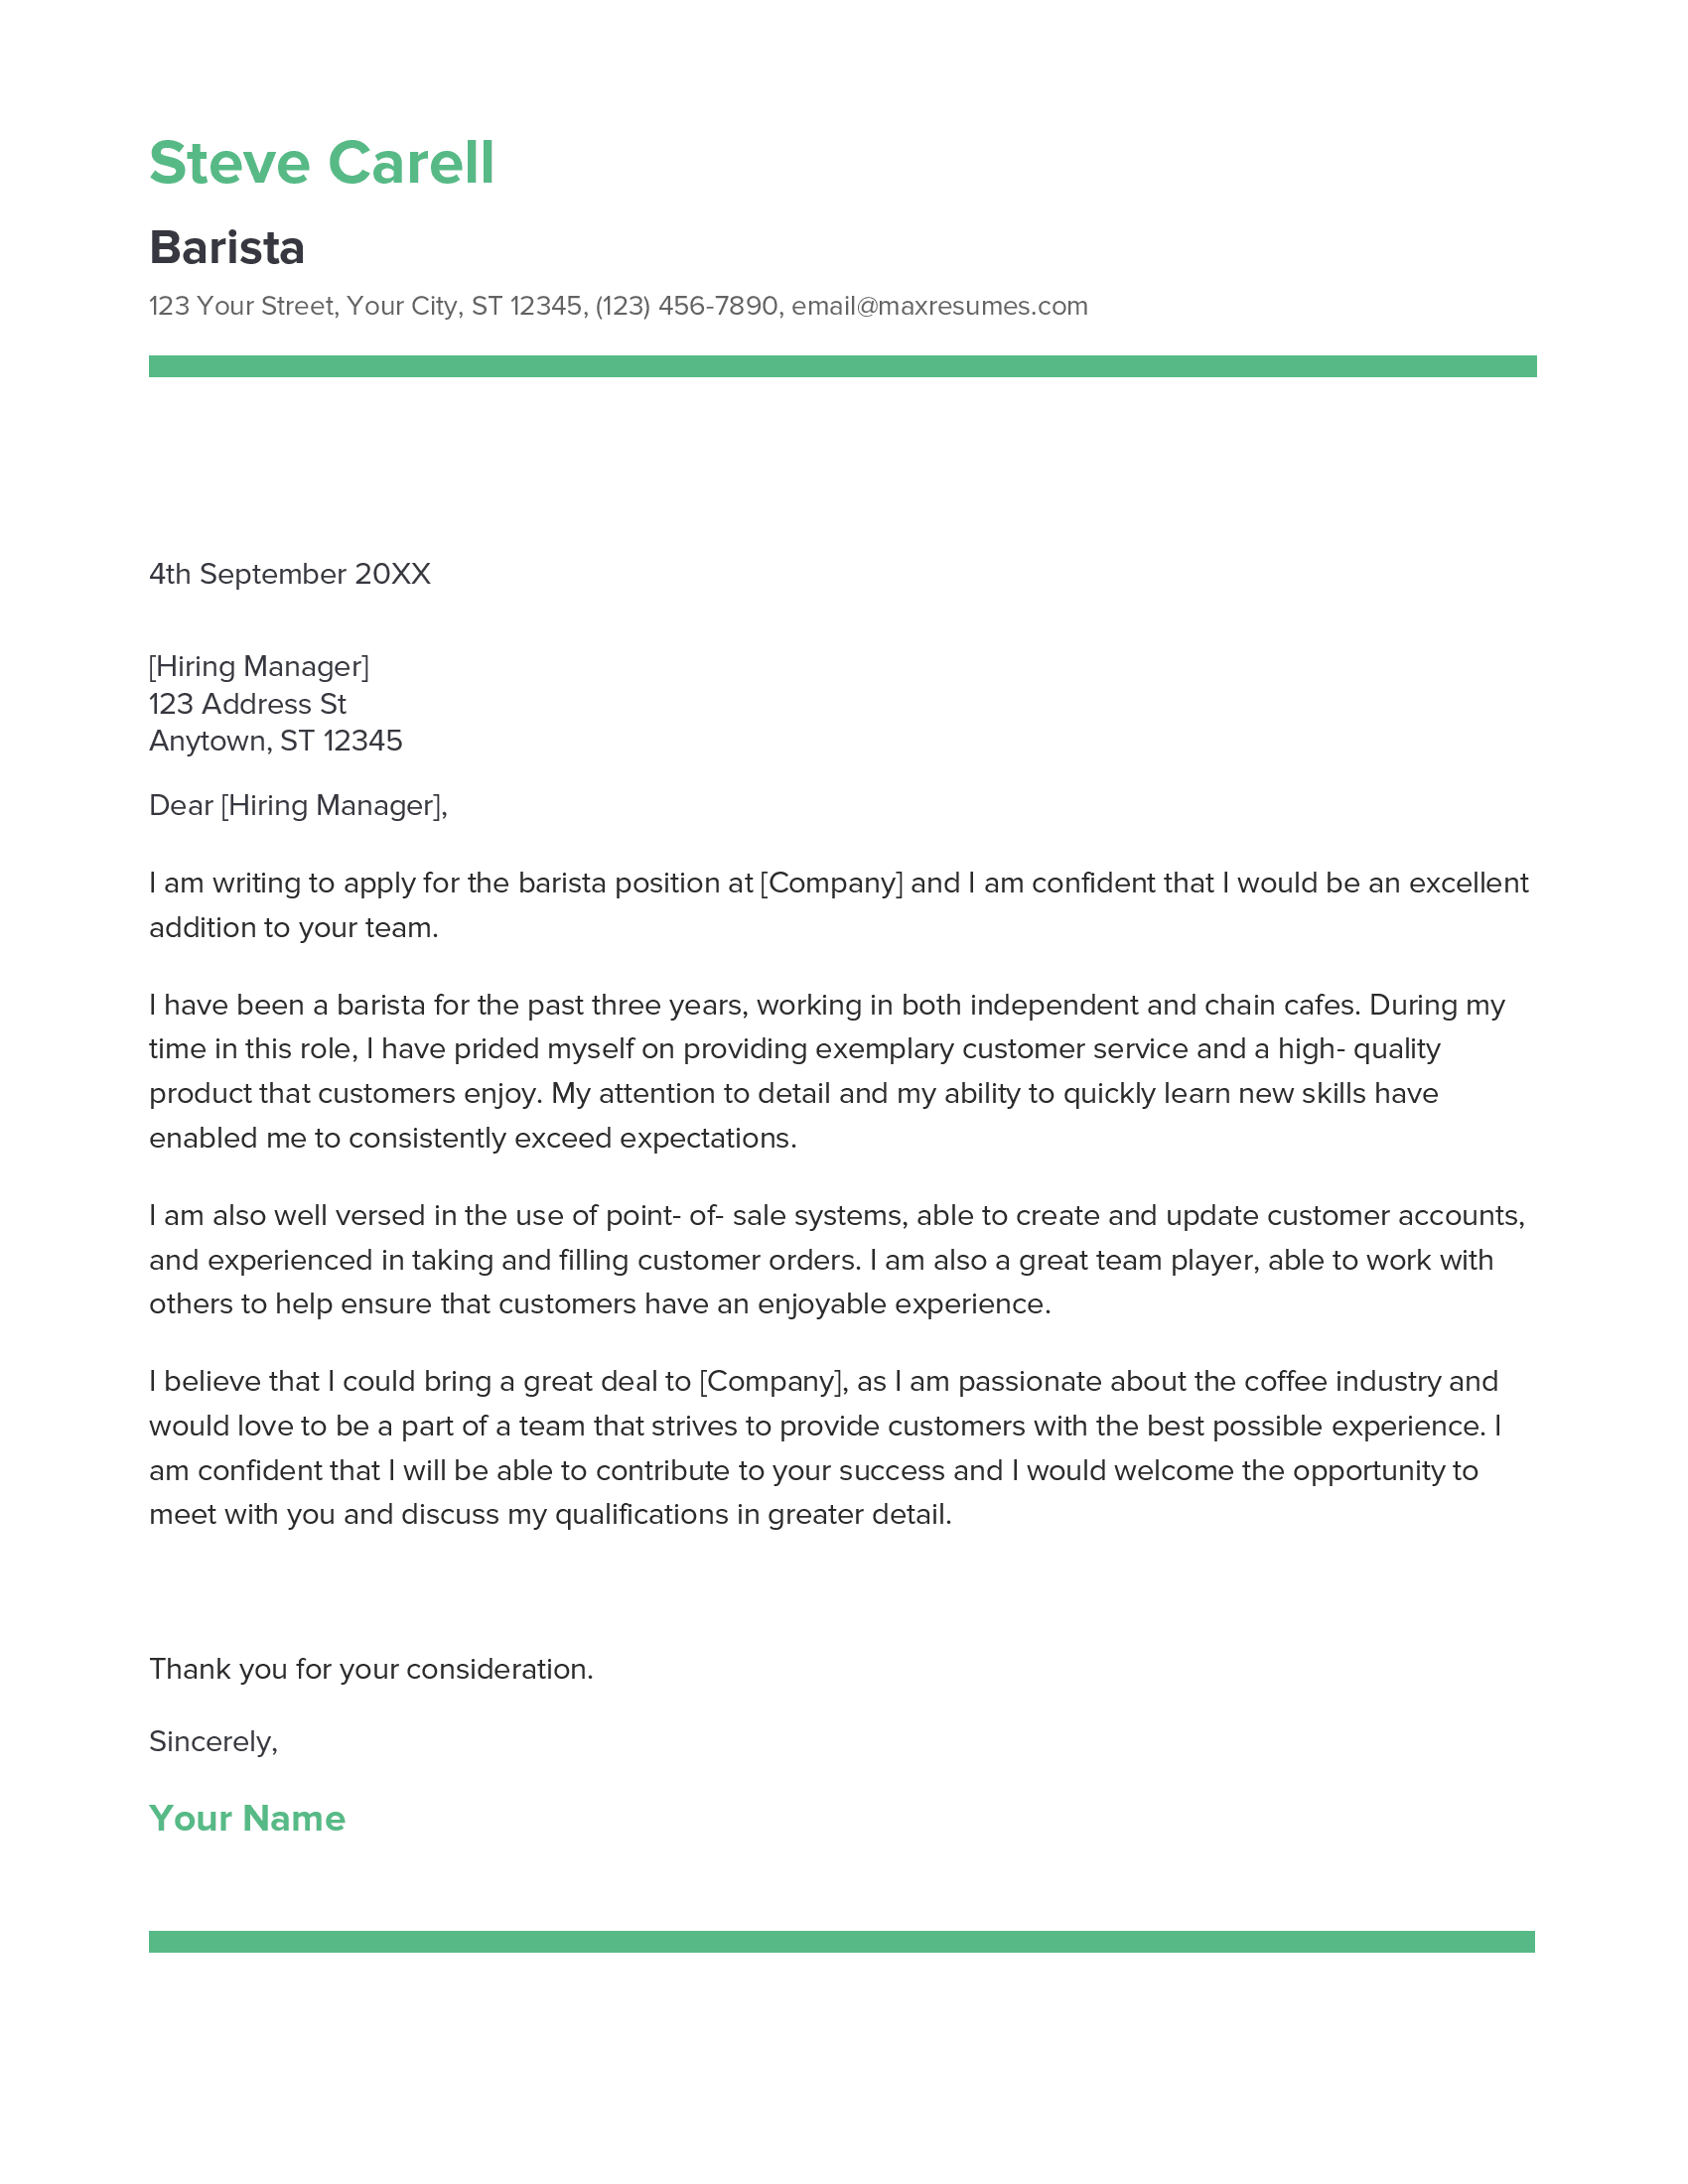 Barista Cover Letter Example